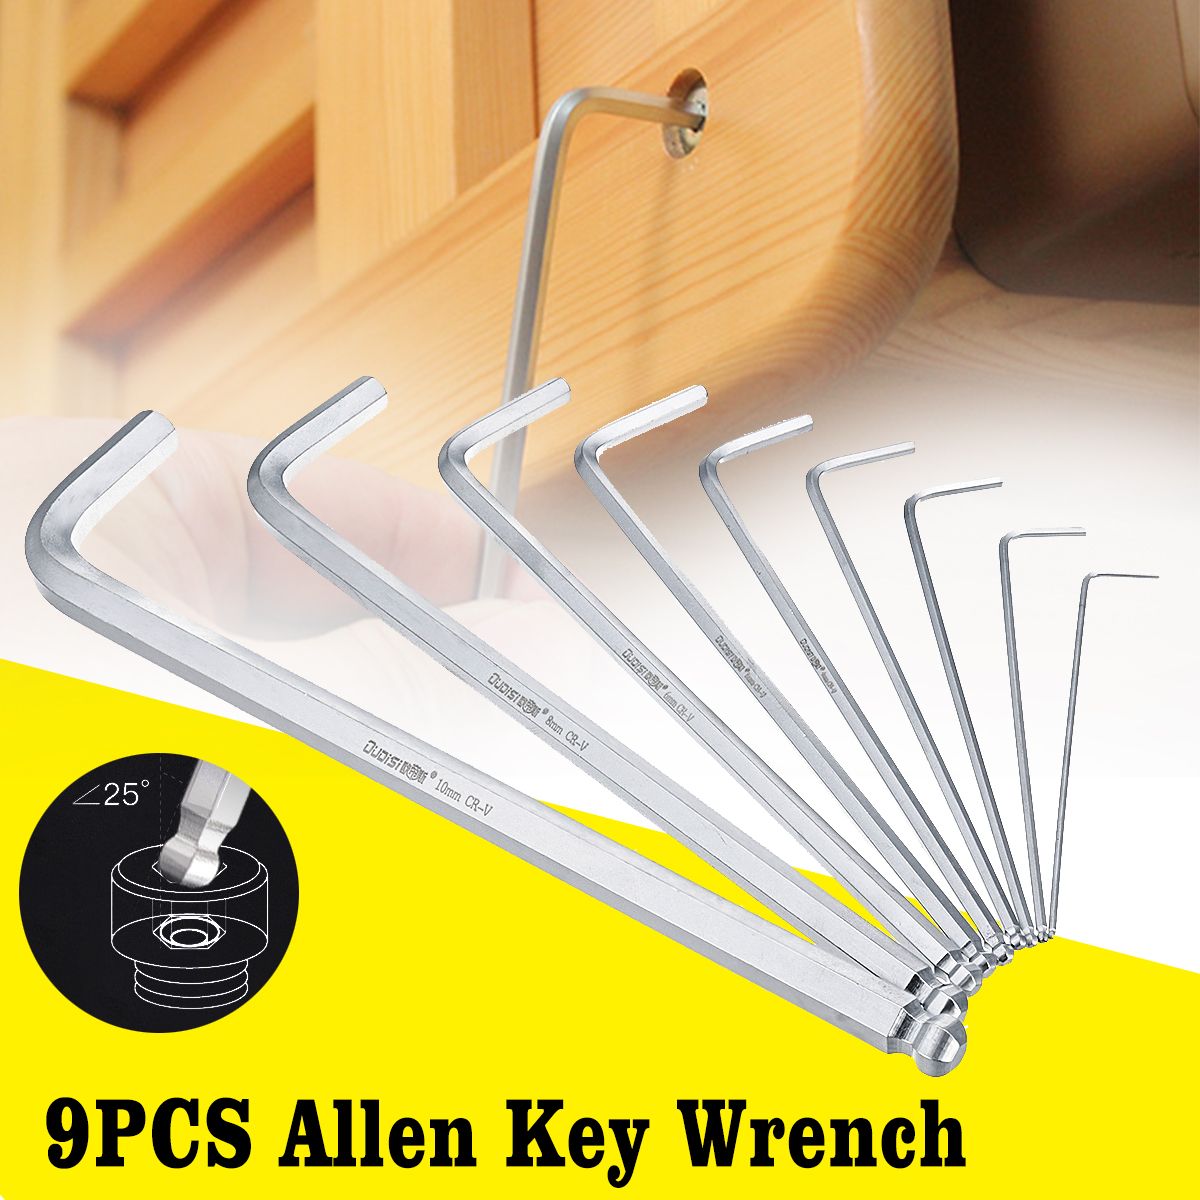 9pcs-Ball-Point-End-Hex-Allen-Allan-Wrench-Key-Hand-Tools-Kits-Accessories-15-10mm-with-Box-1260527